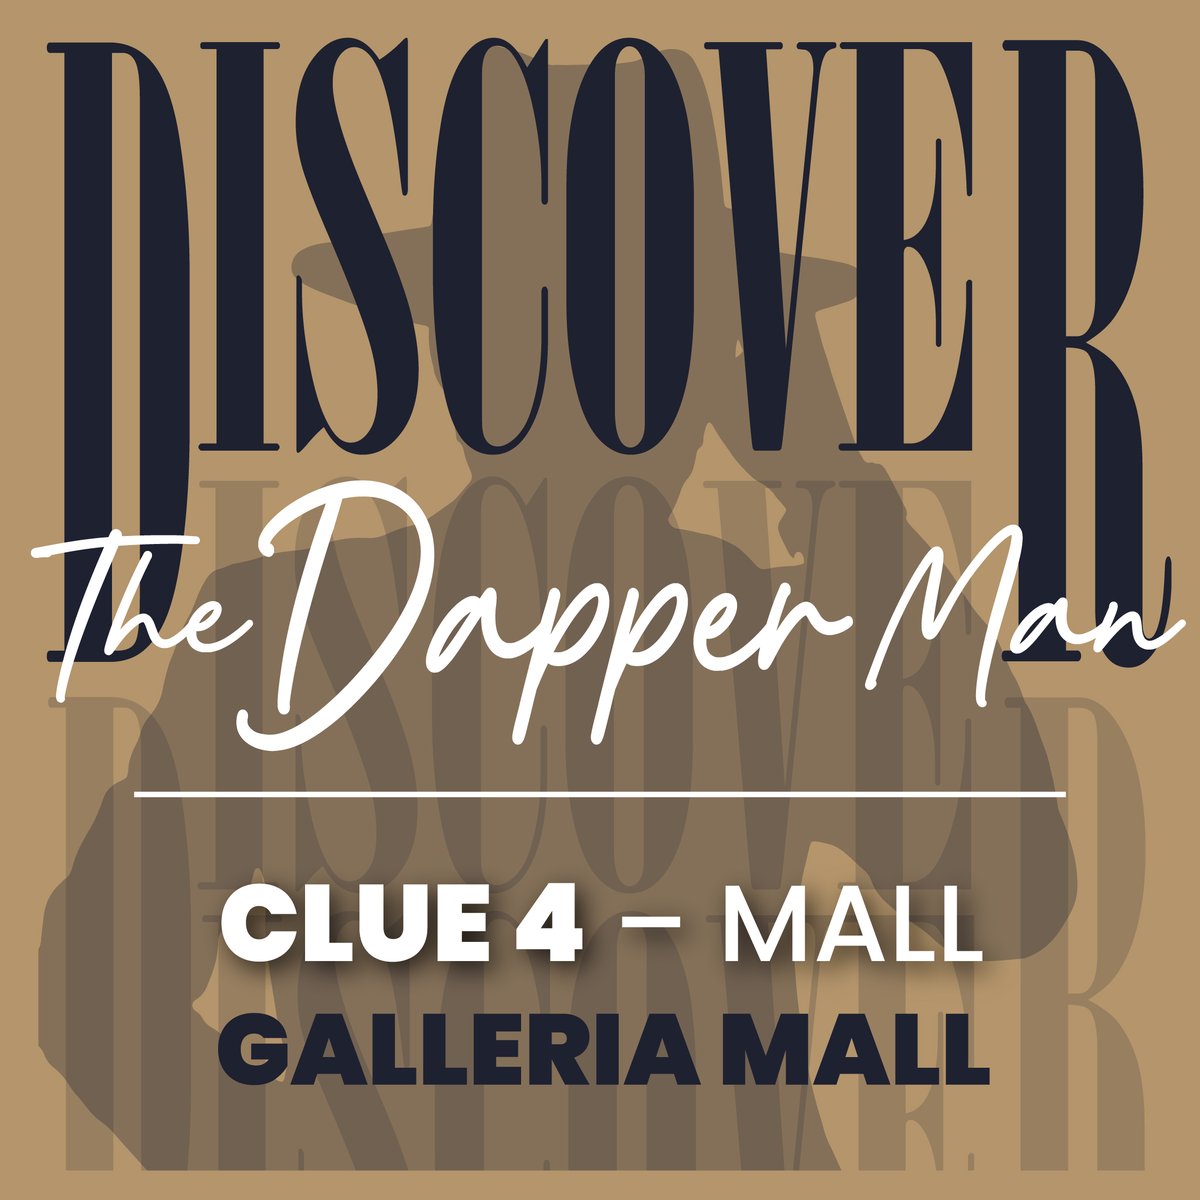 The Dapper Man is at Galleria Mall!

Head to Galleria Mall and take a photo with the John Craig mannequin located somewhere in the mall.

Use the #DiscoverTheDapperMan and tagging @JohnCraigSA @galleriamall and you could win a R5000 shopping voucher.